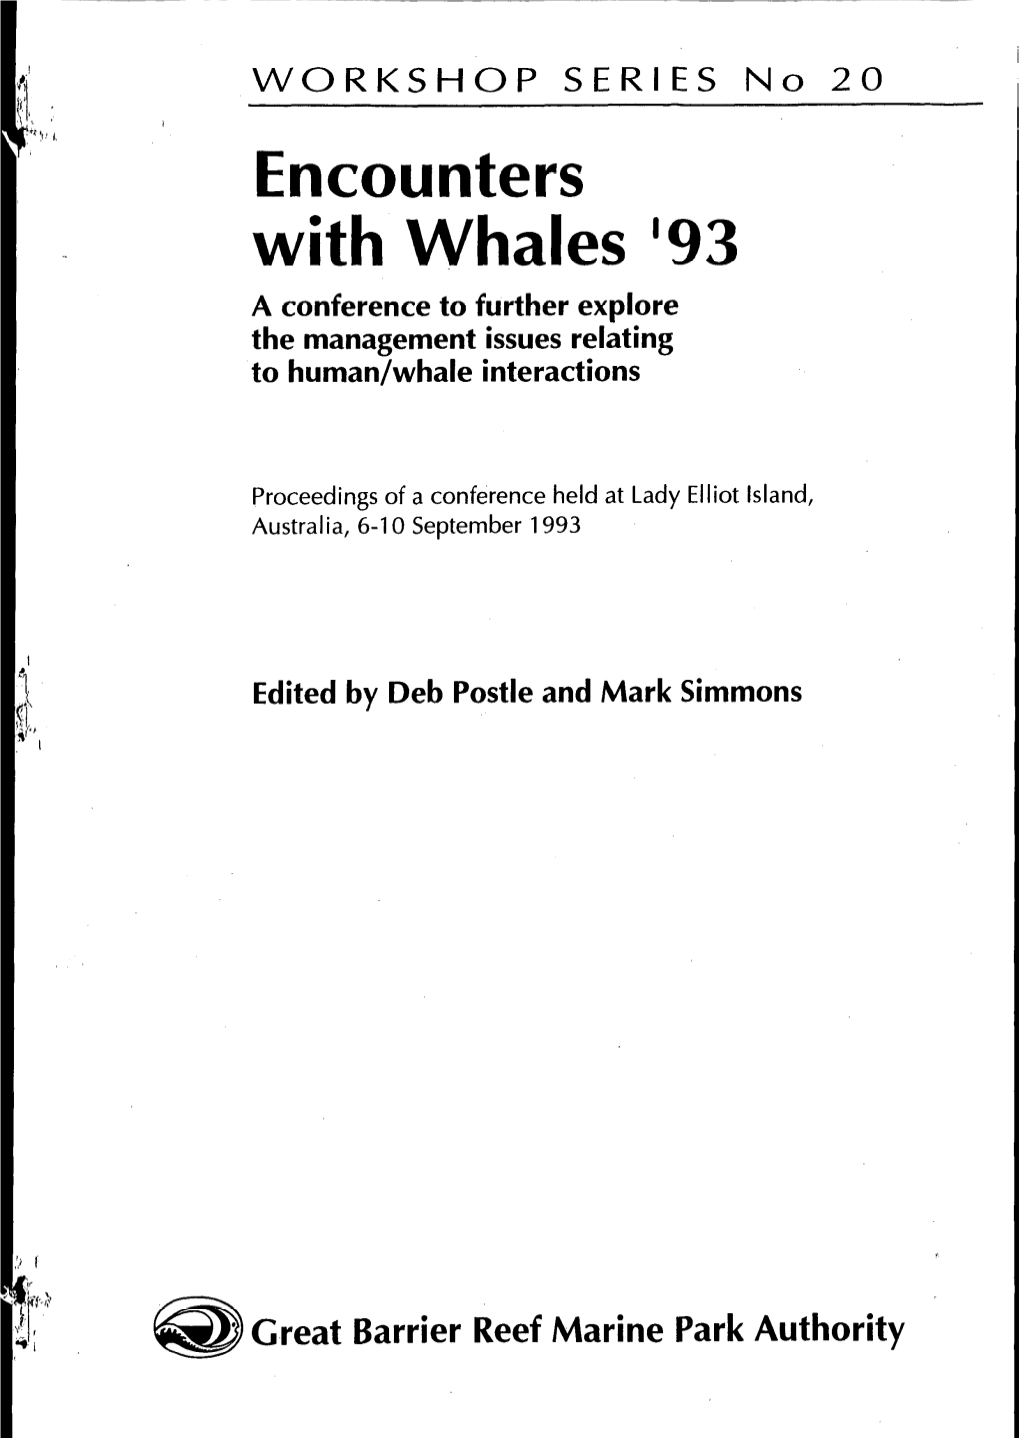 Encounters with Whales ‘93 a Conference to Further Explore the Management Issues Relating to Human/Whale Interactions